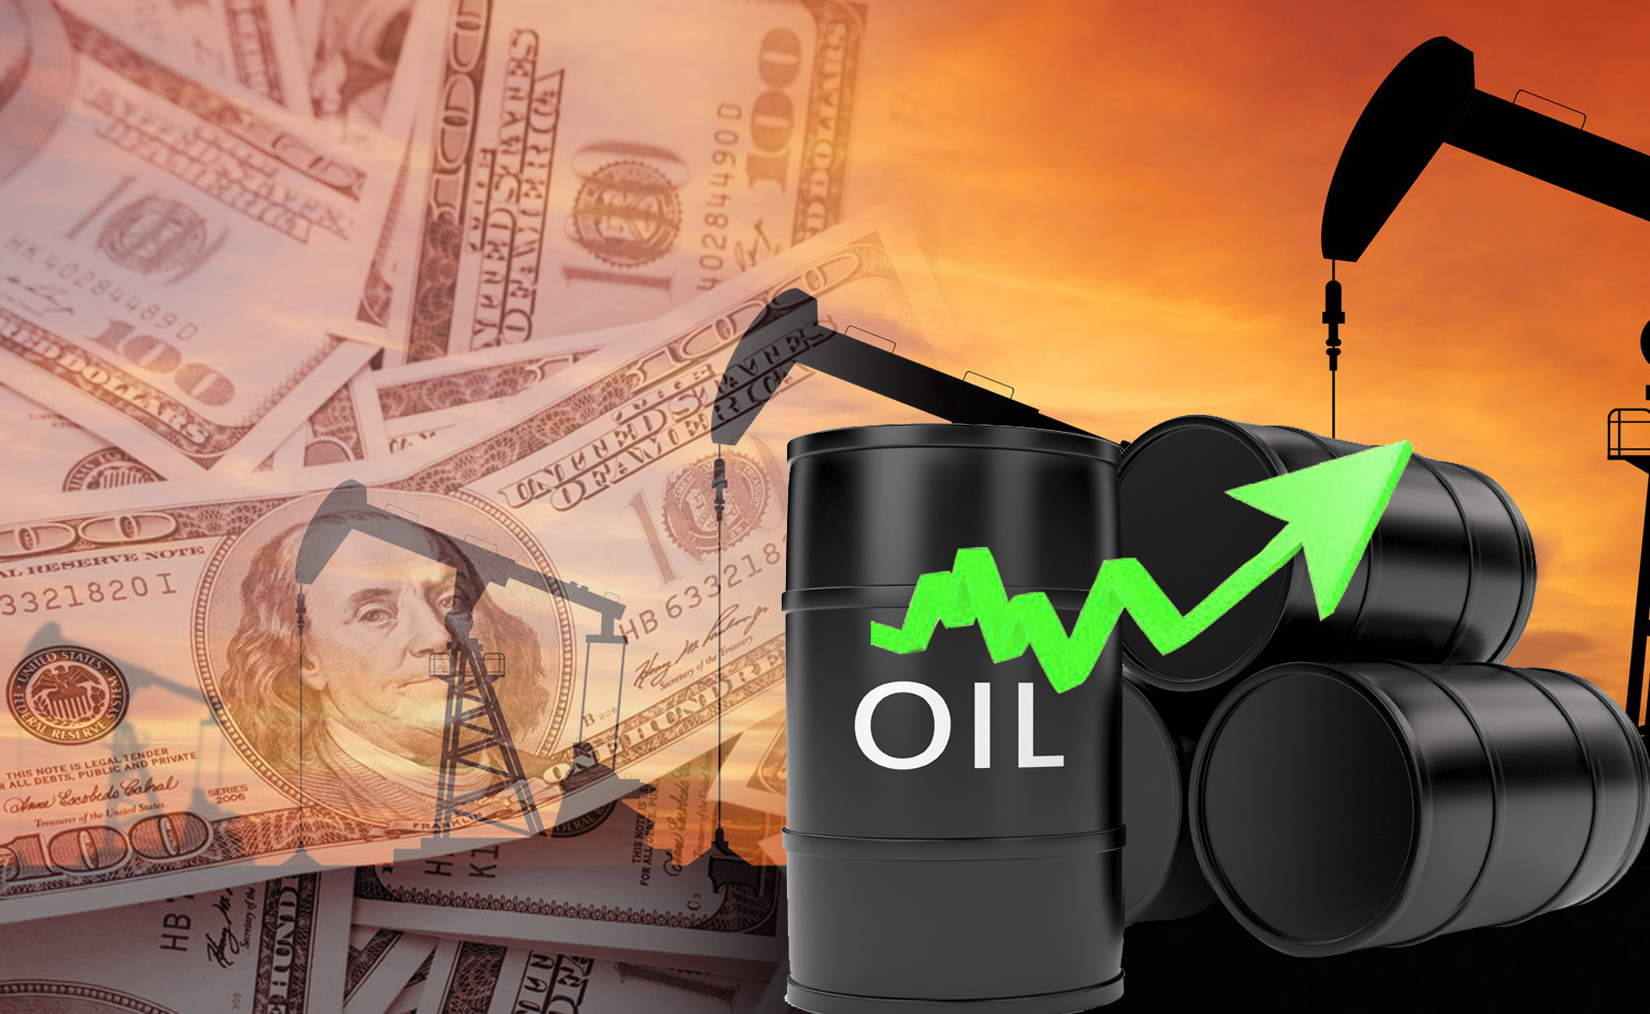 Kuwait oil price up 83 cents to USD 67.64 pb                                                                                                                                                                                                              